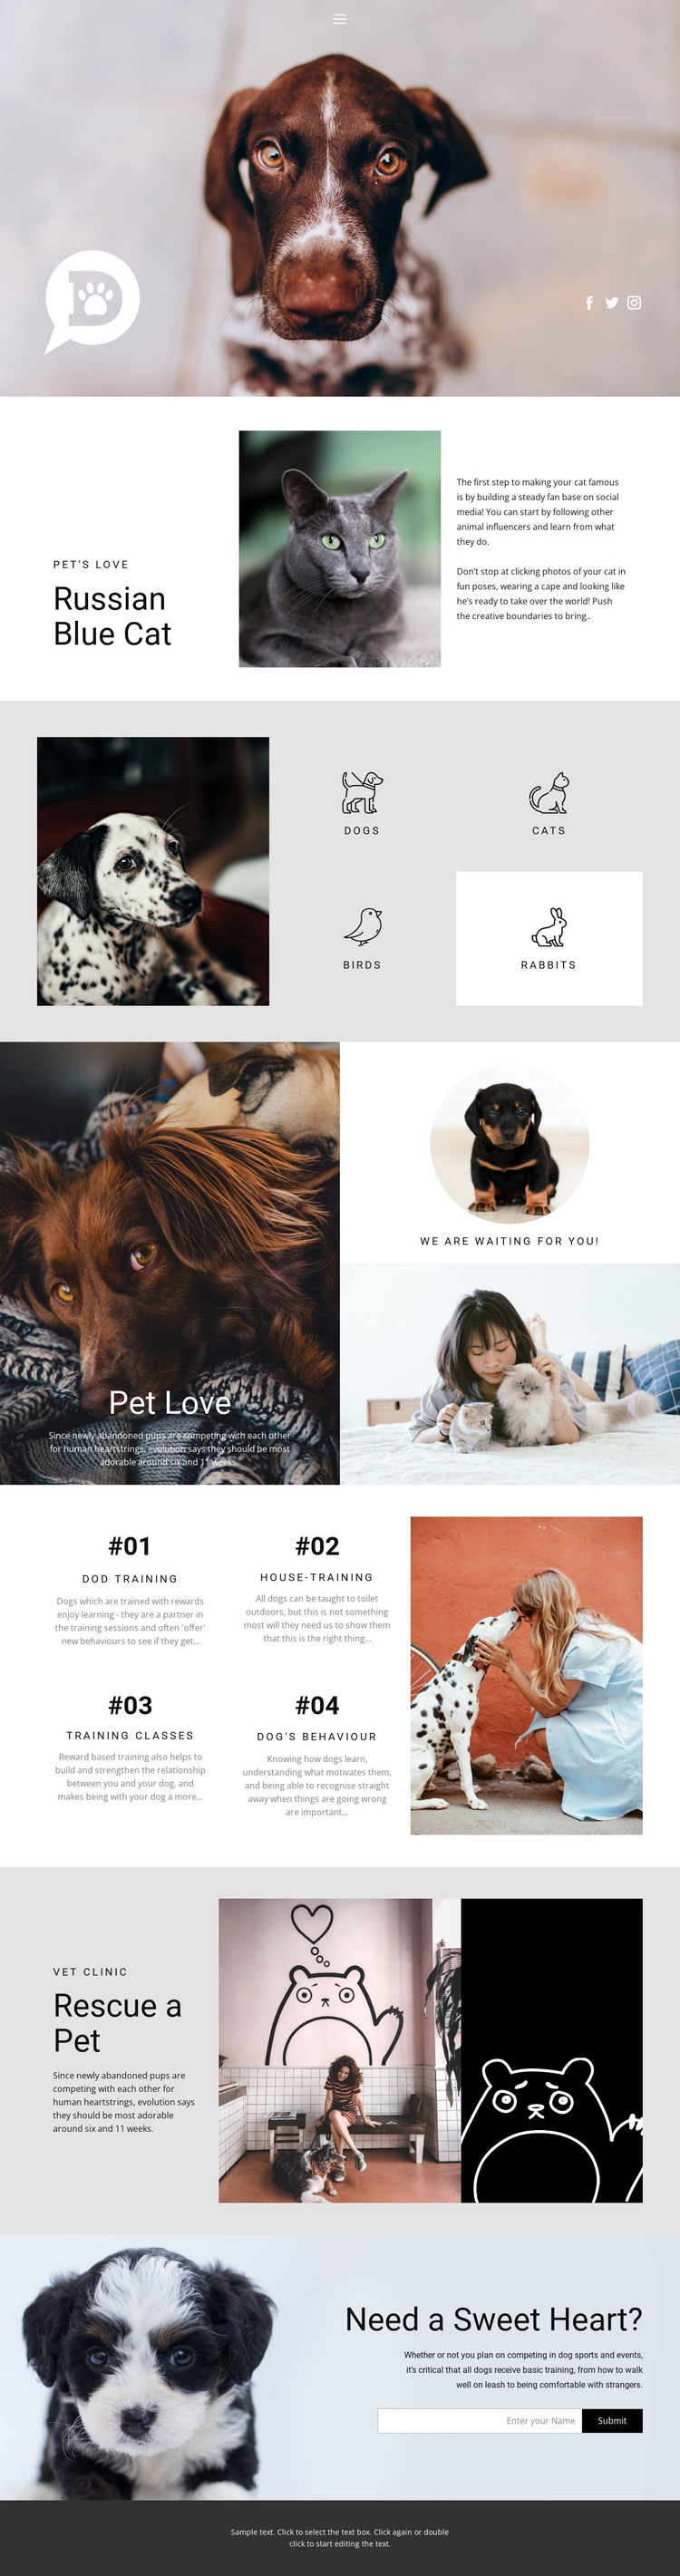 Care for pets and animals WordPress Theme